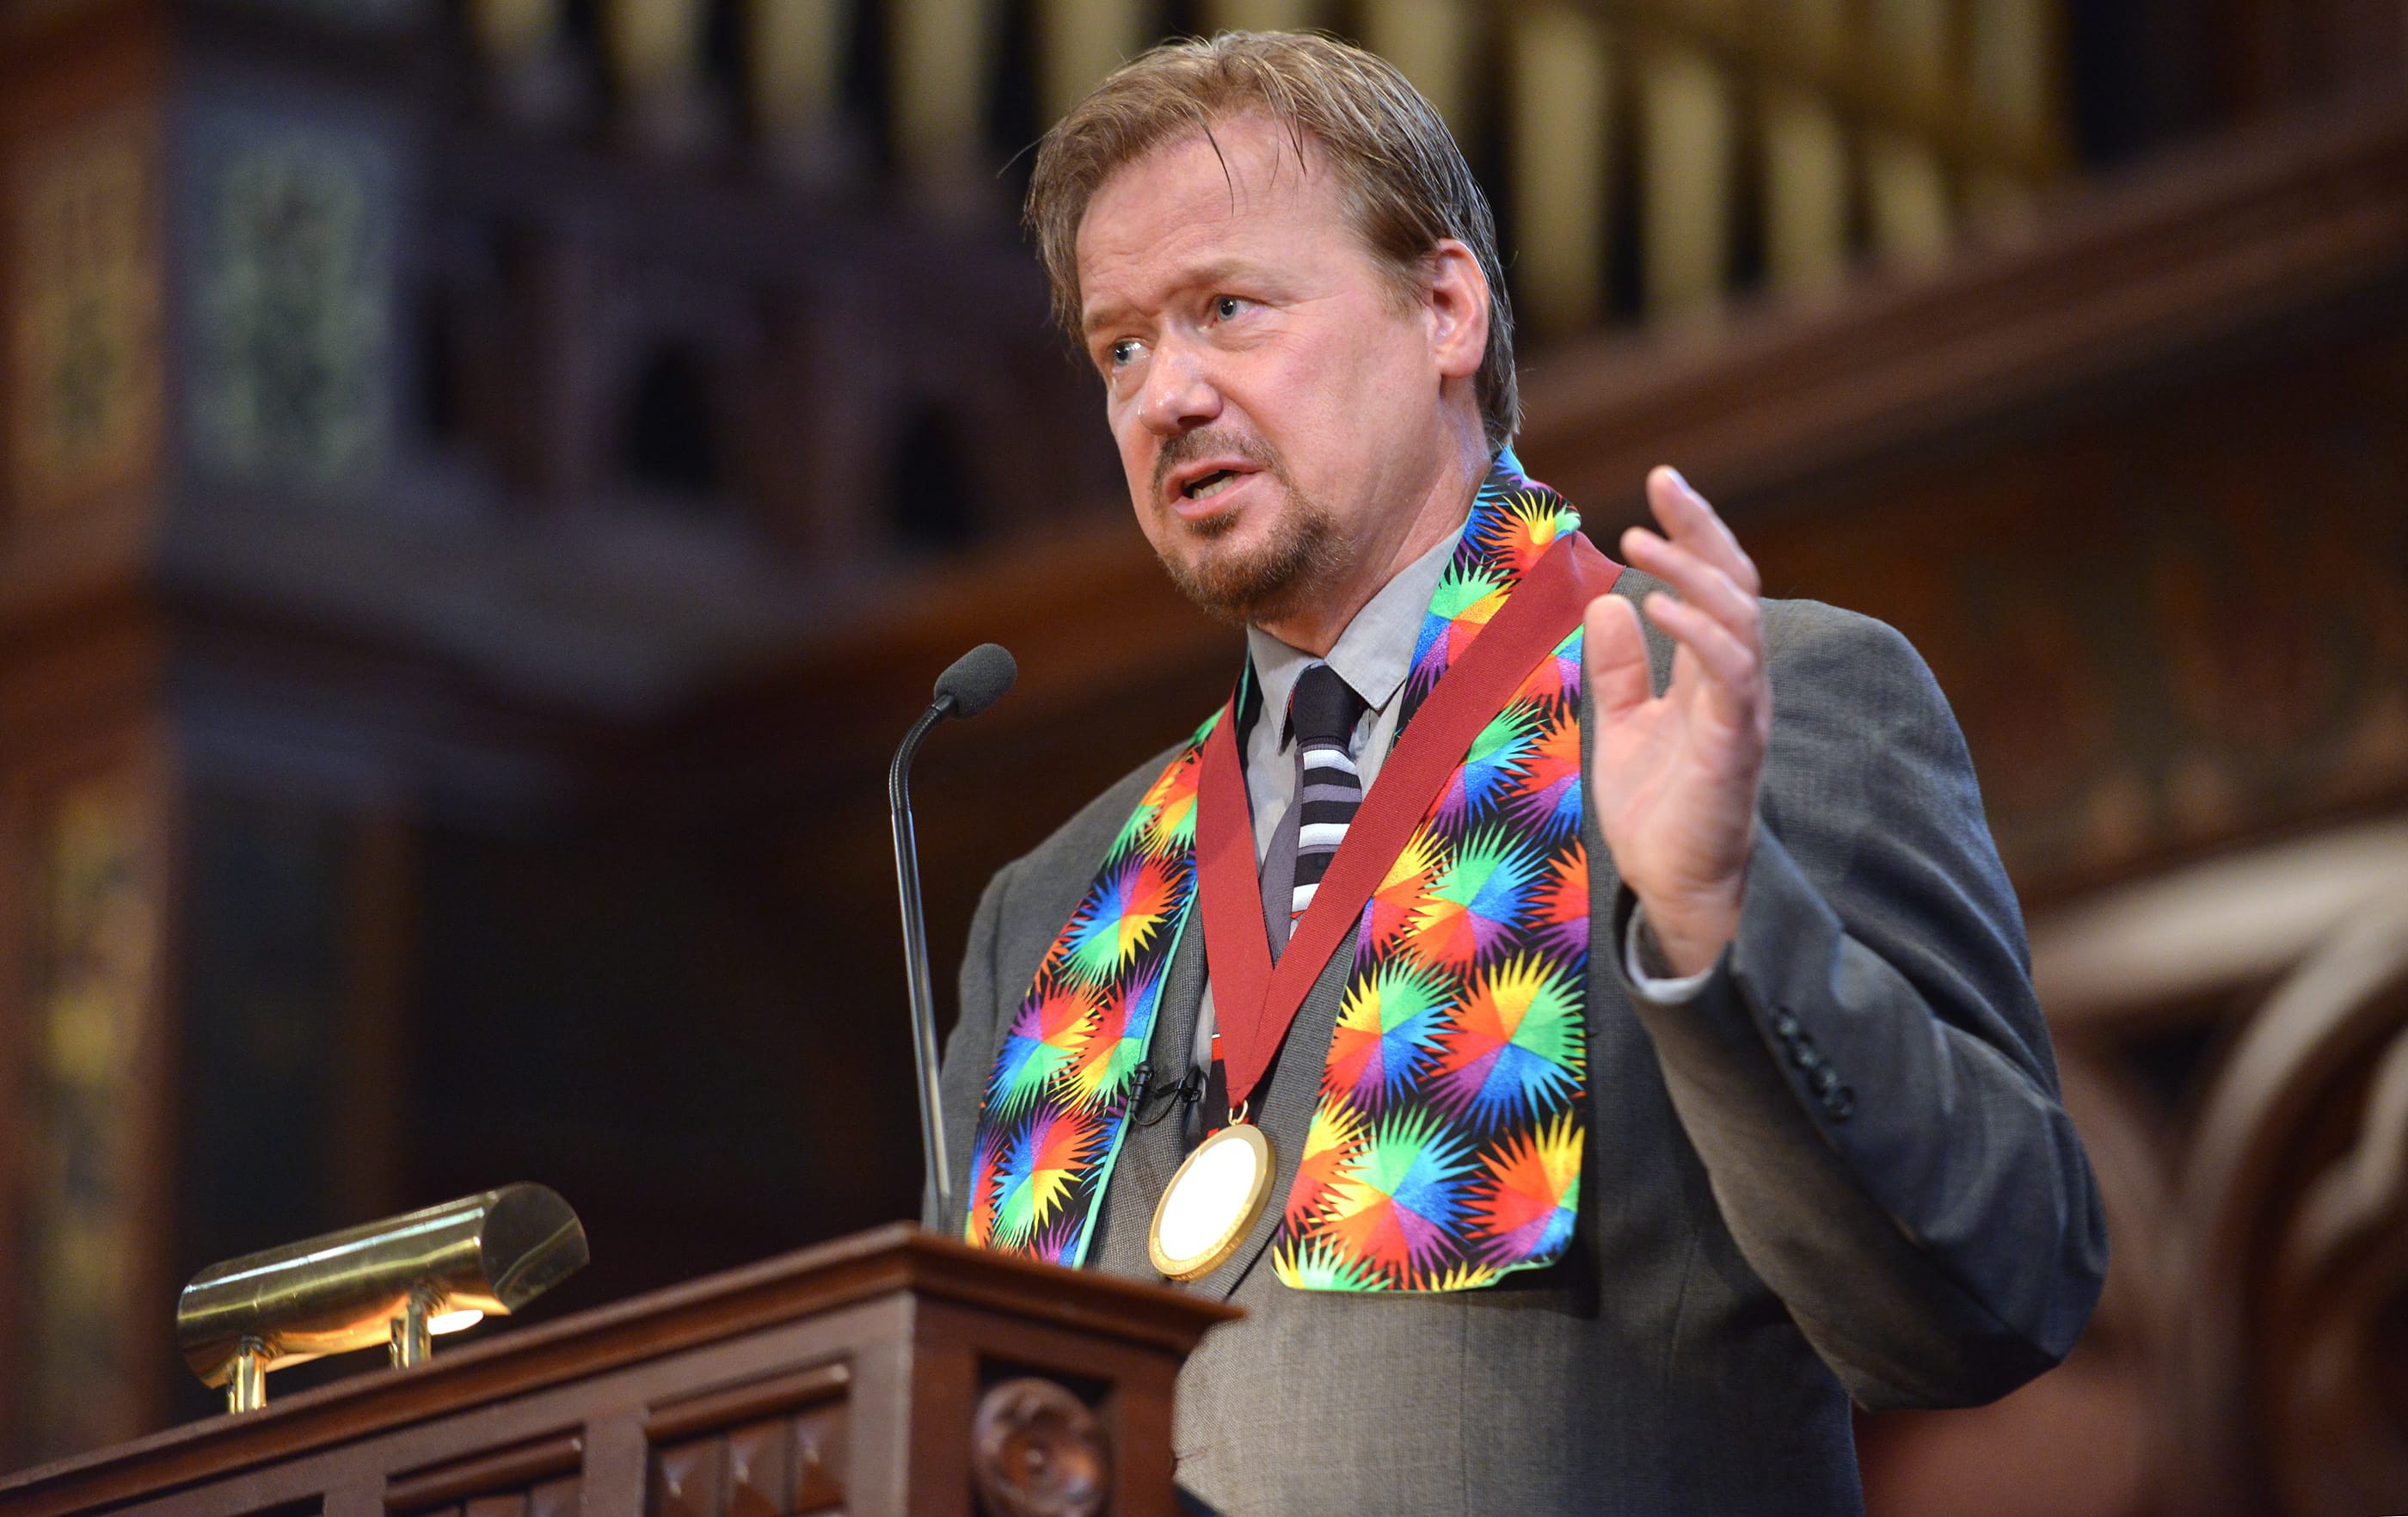 Frank Schaefer speaks to parishioners June 14 after receiving an Open Door Award for his public advocacy during a ceremony marking 10 years of legal gay marriage in Massachusetts, at Old South Church in Boston.